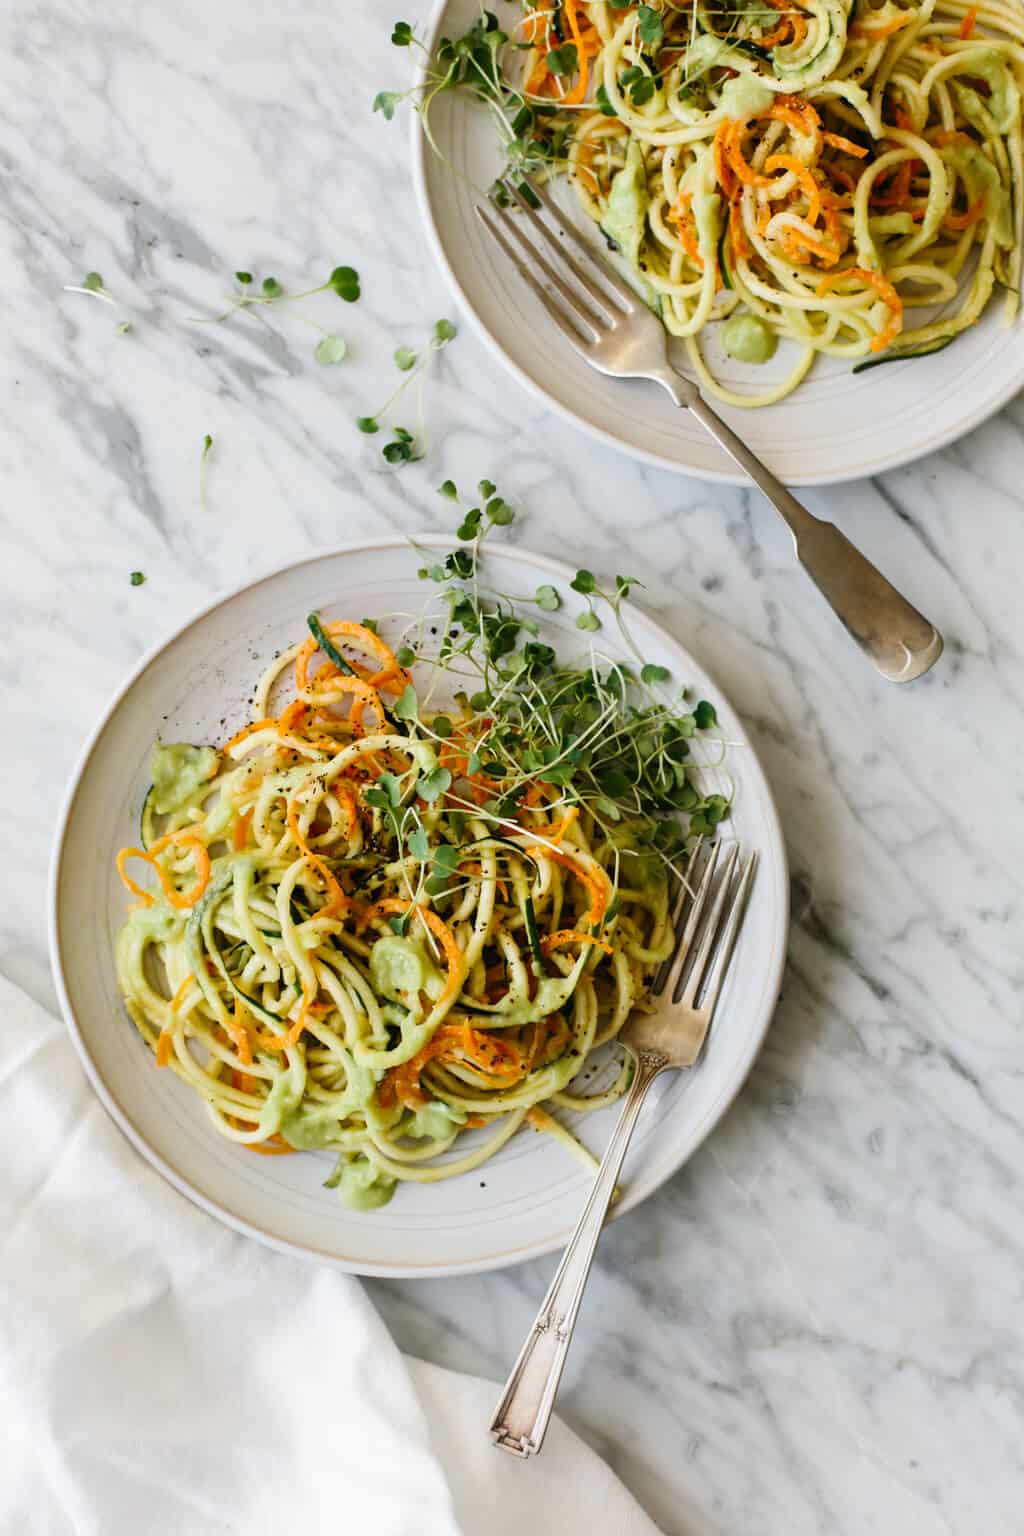 Carrot and zucchini pasta with avocado cucumber sauce